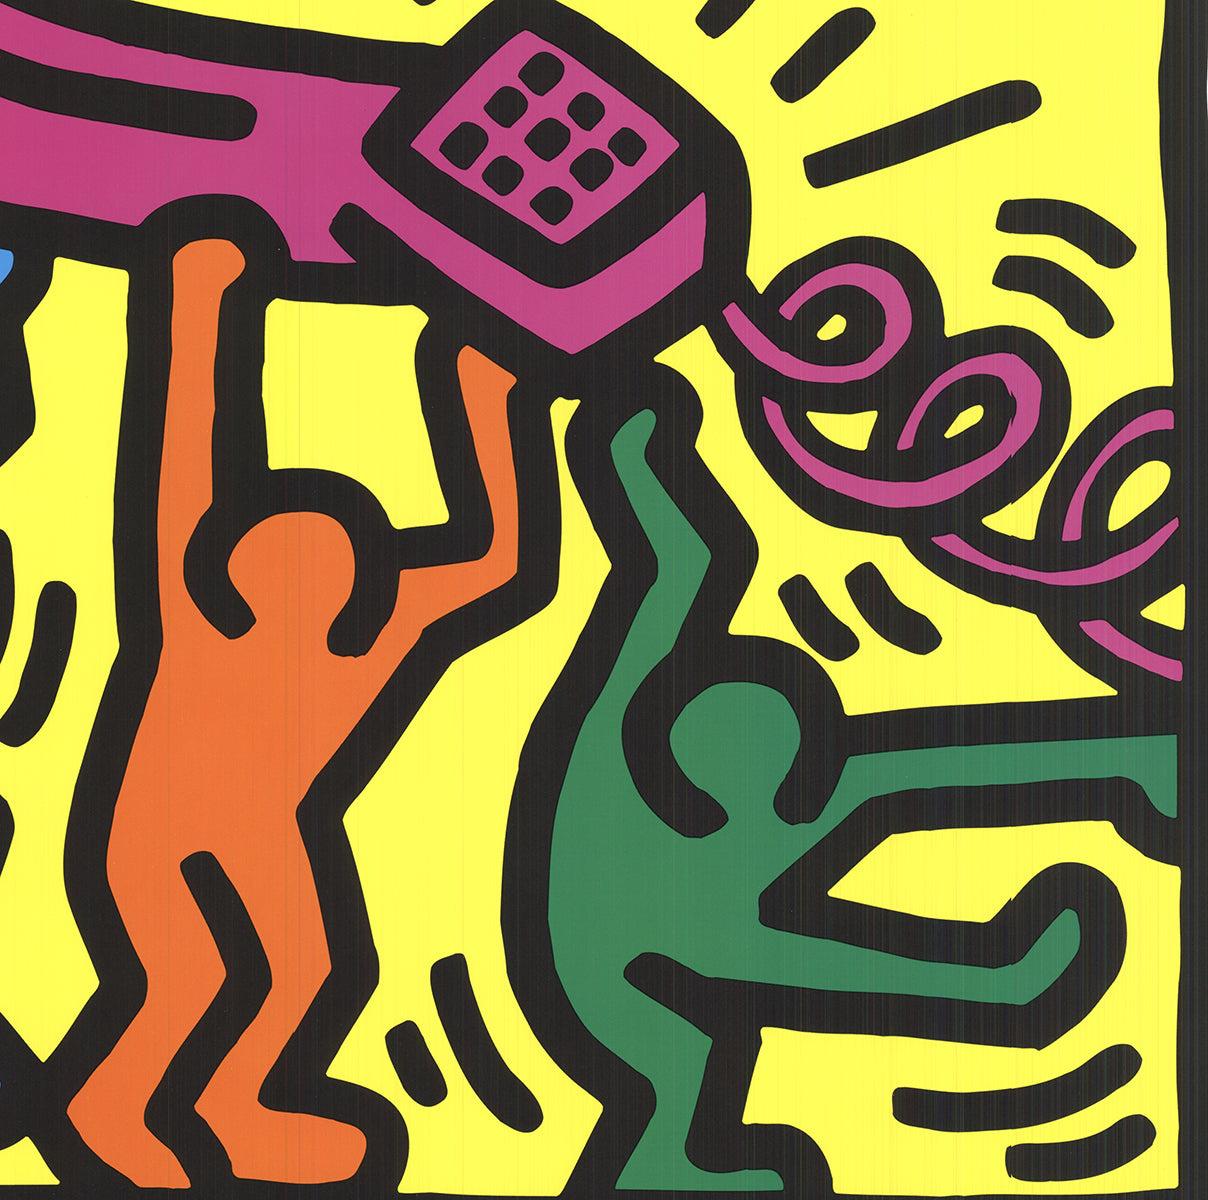 Keith Haring 'Untitled, 1989' 2008- Lithographie offset en vente 3